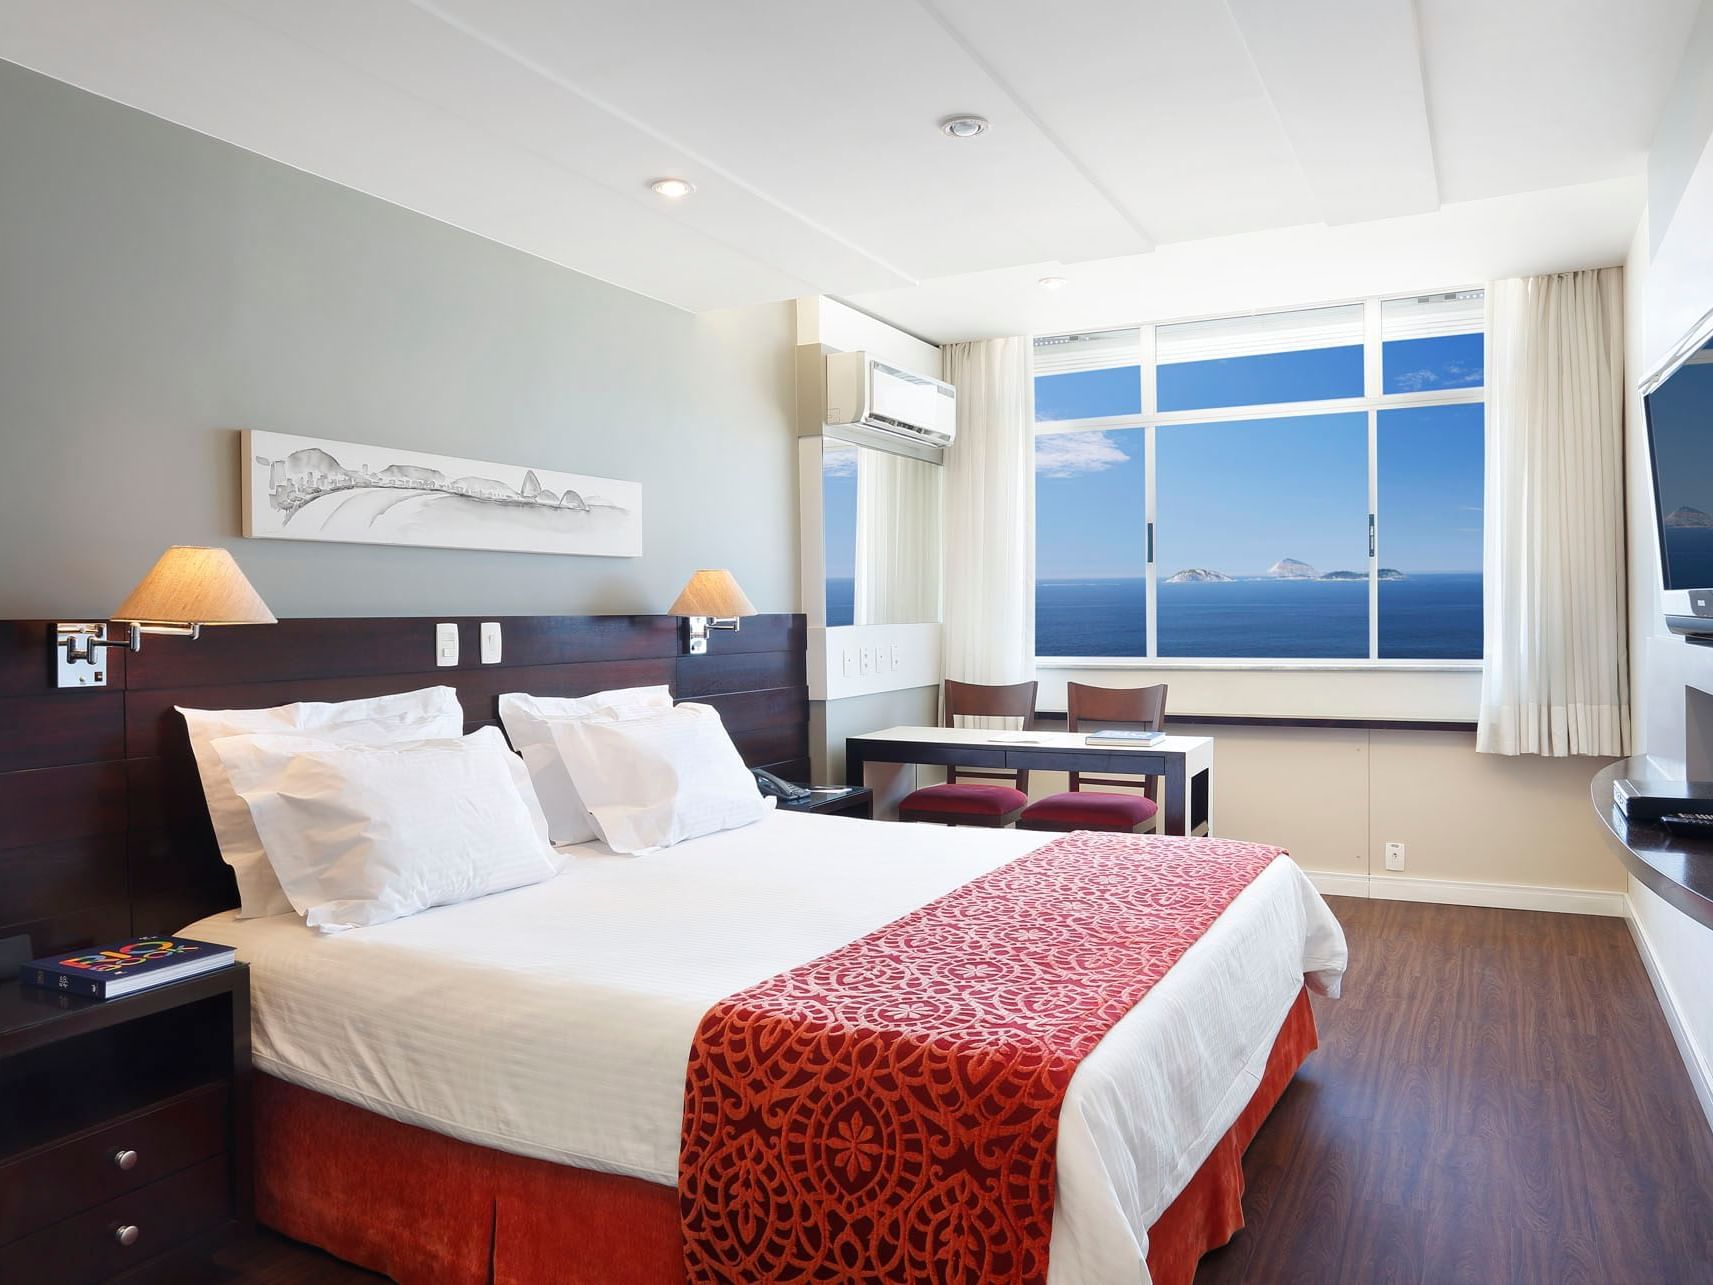 Deluxe Ocean View Room with king bed at Sol Ipanema Hotel